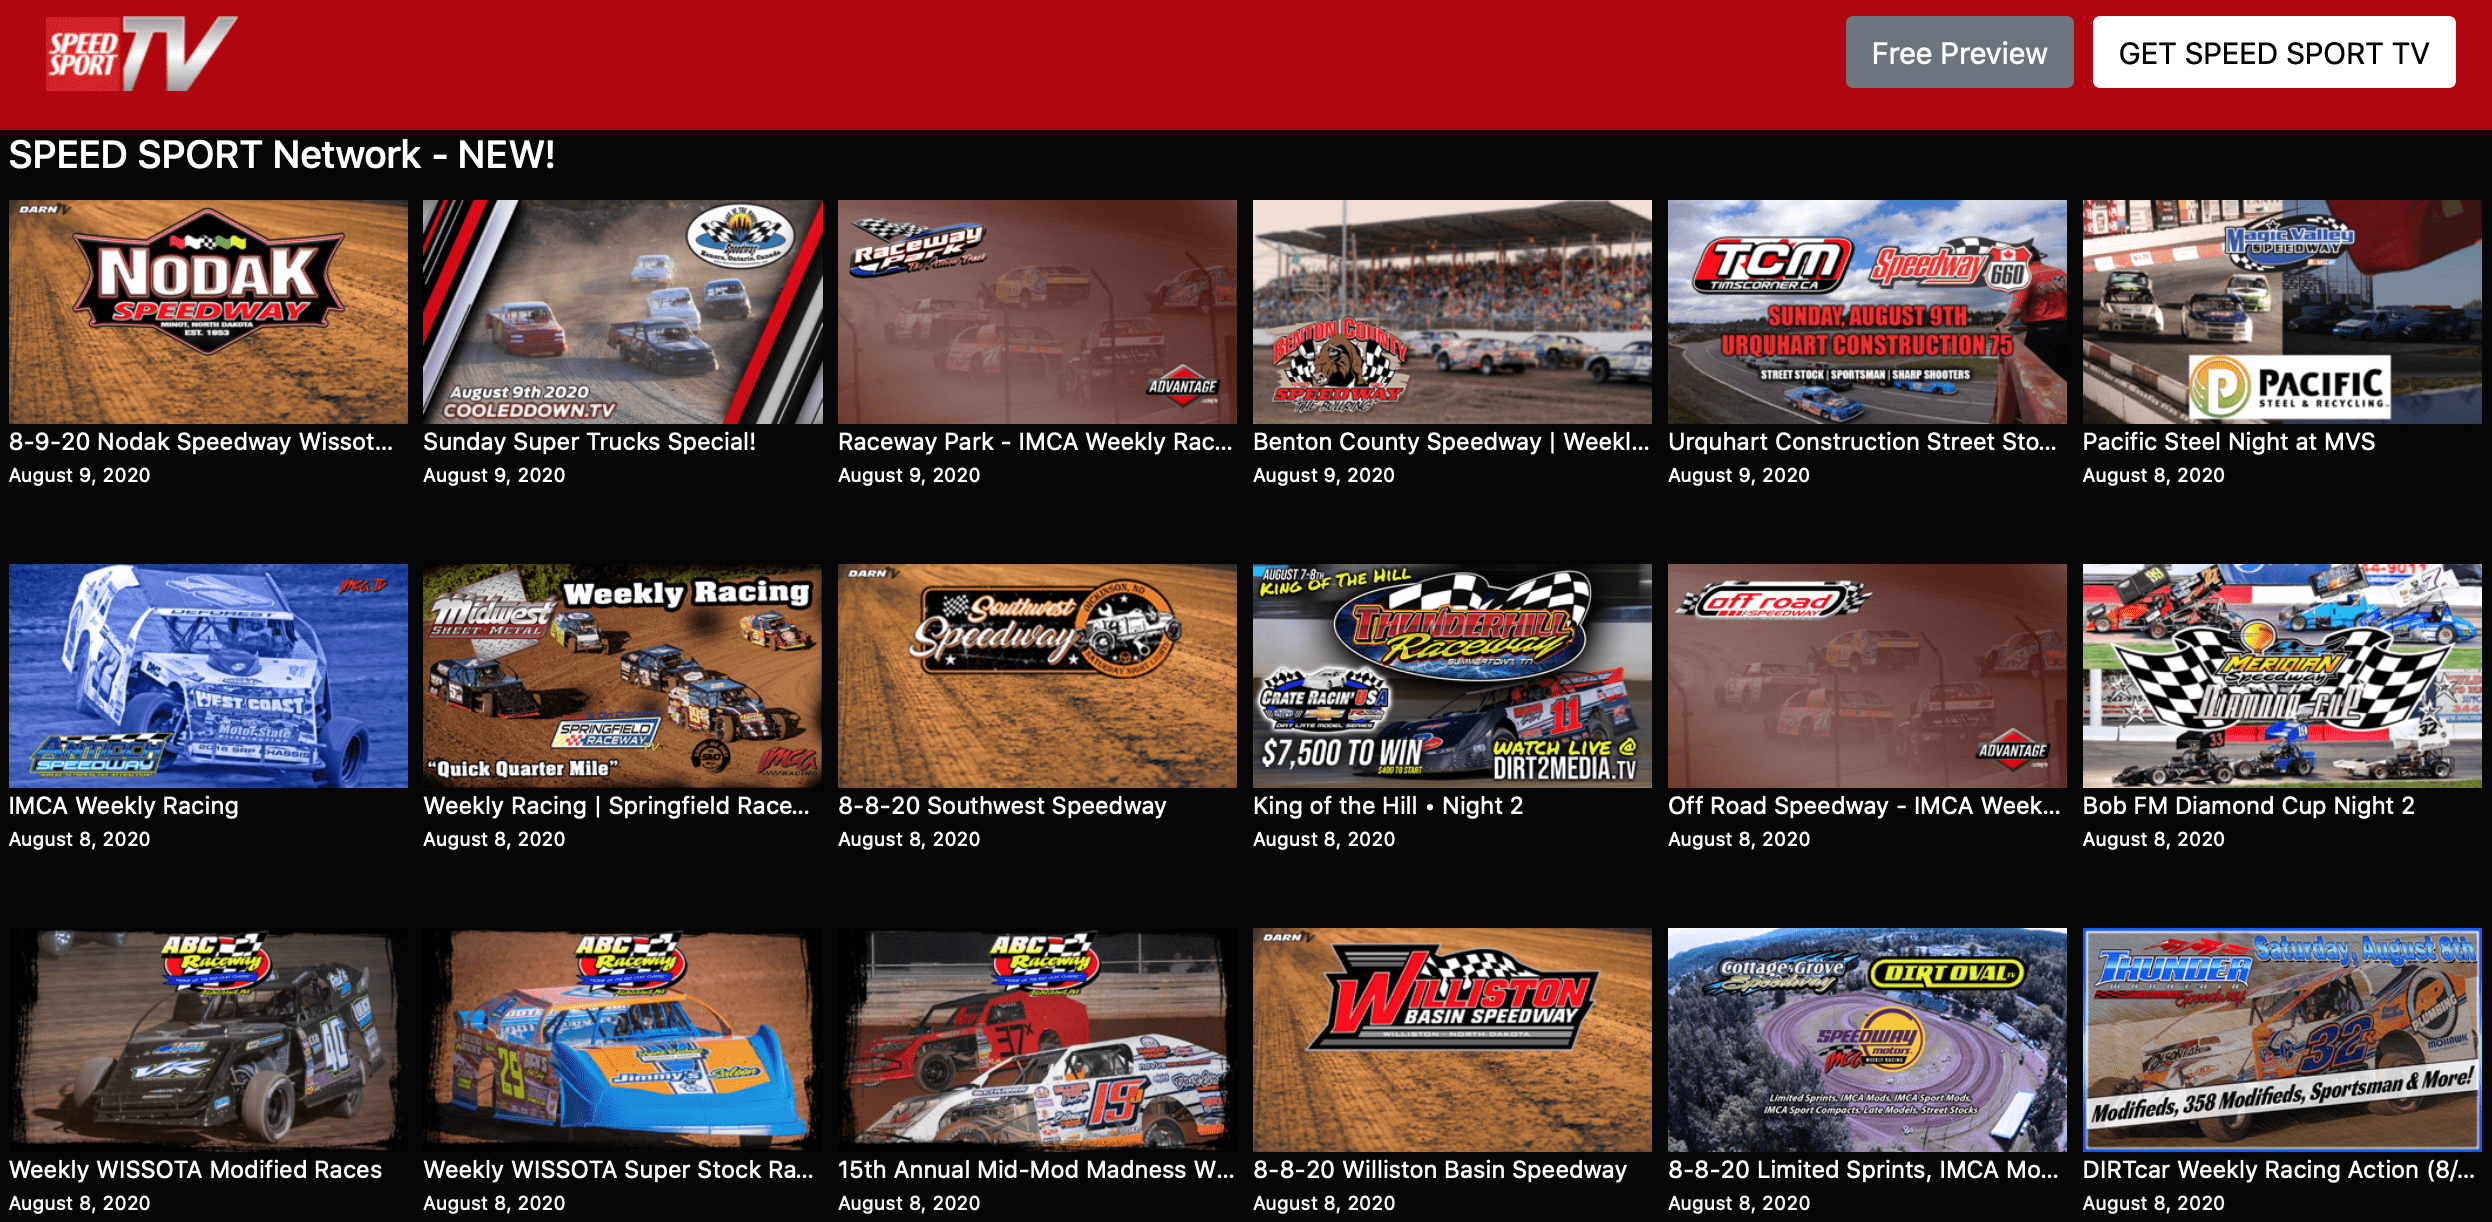 Check out all the new on demand races available on SPEEDSPORT.TV today!